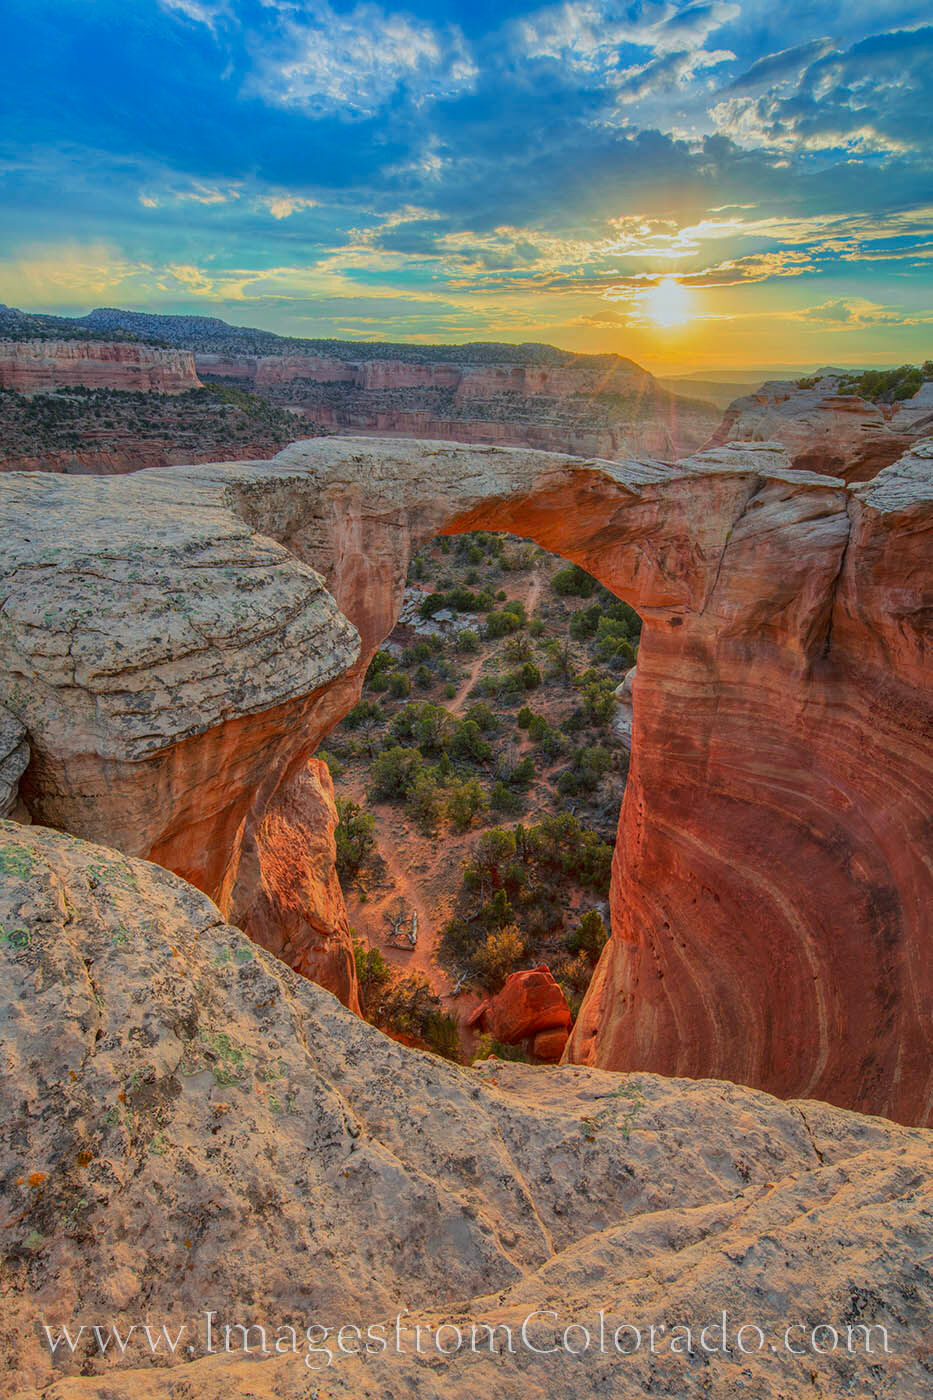 Sunset comes to Rattlesnake Canyon on a warm summer evening. Here, the iconic Centennial Arch, known by other names including...